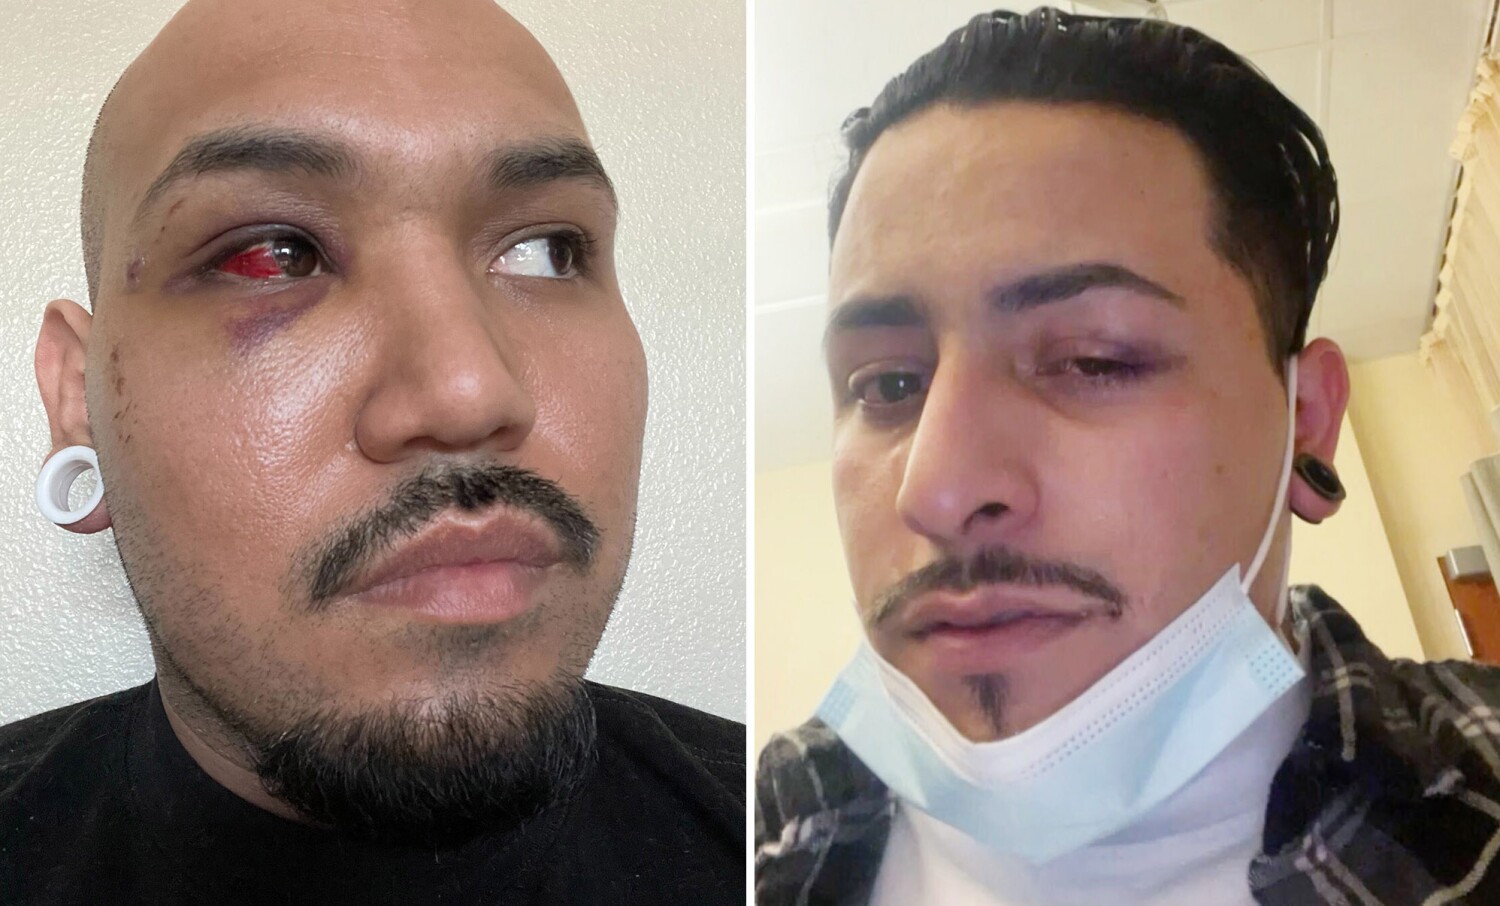 'It was the most evil, demonic thing': Drag show producer speaks out after attack in Pasadena